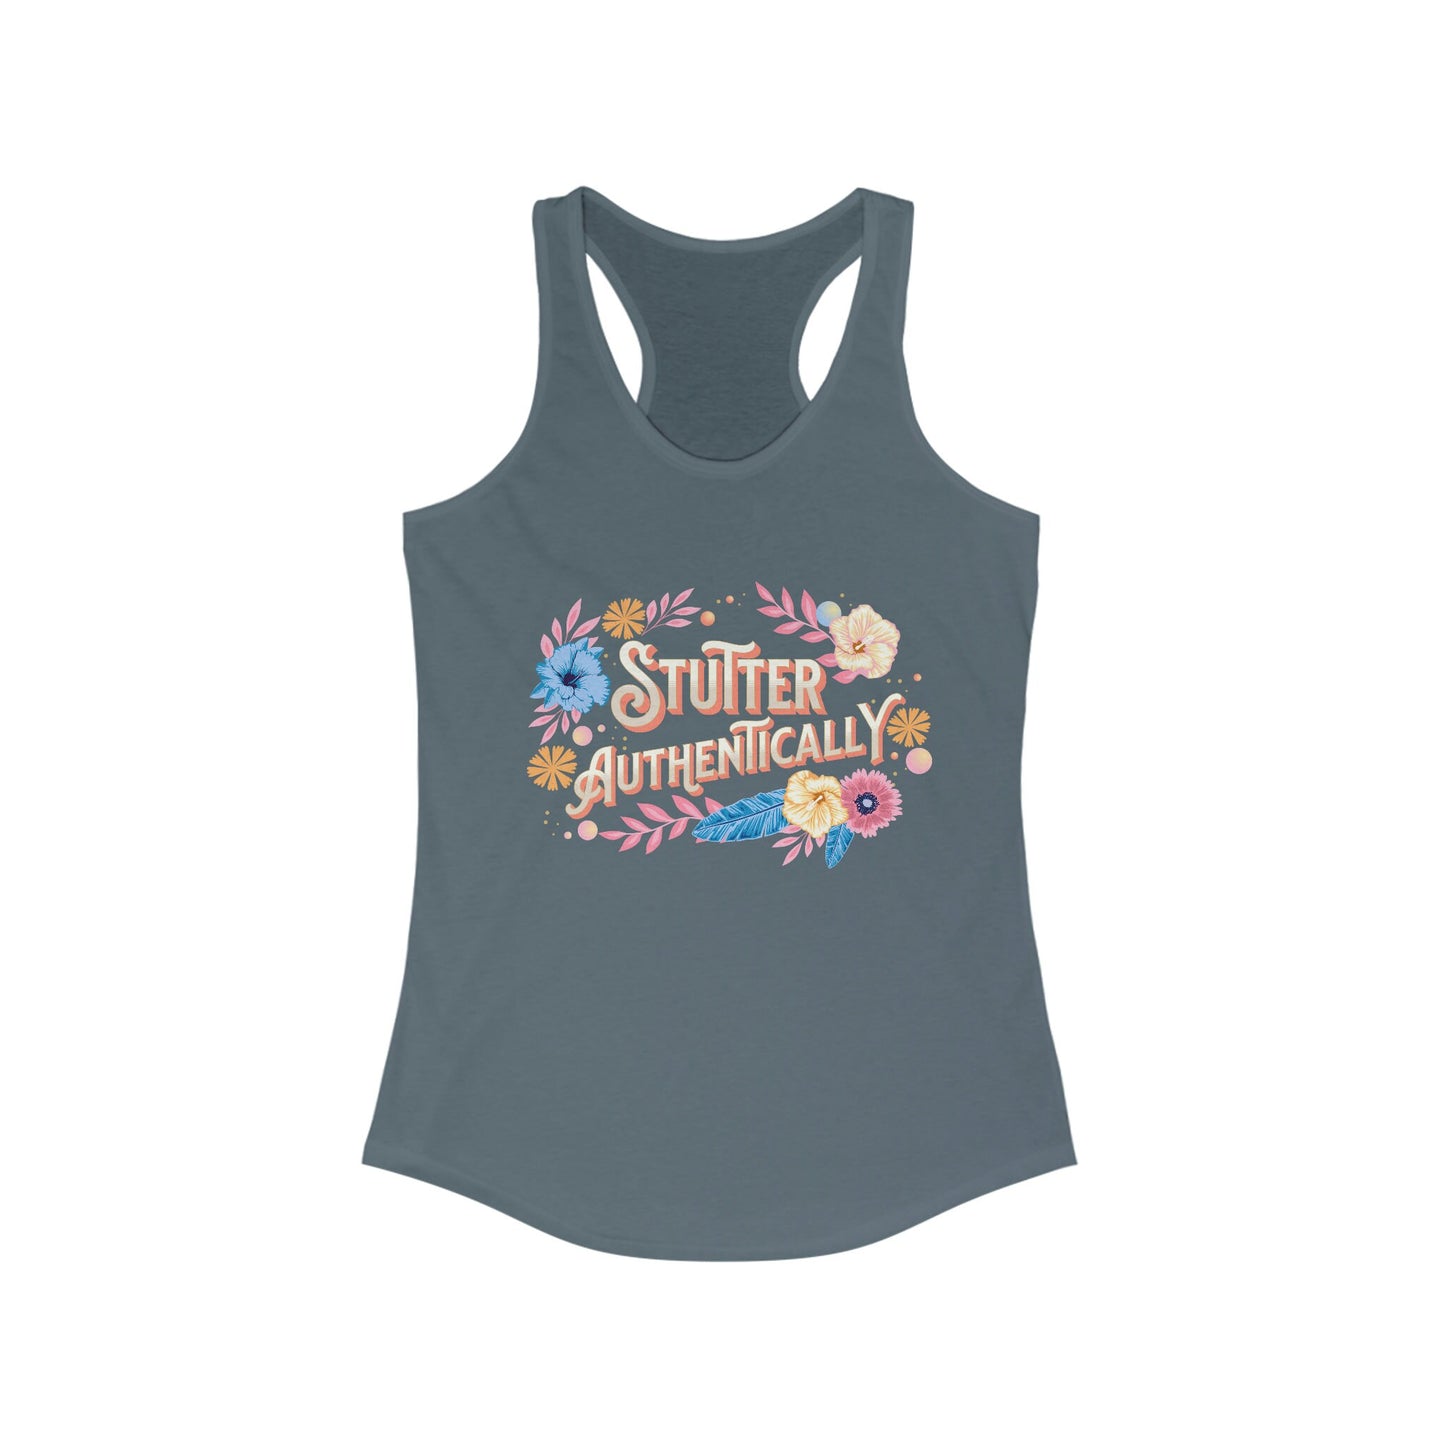 Women's Racerback Stuttering Tank Top, Team Stuttering, Stutter Authentically, Normalize Stuttering, Gift for woman who stutters, SLP